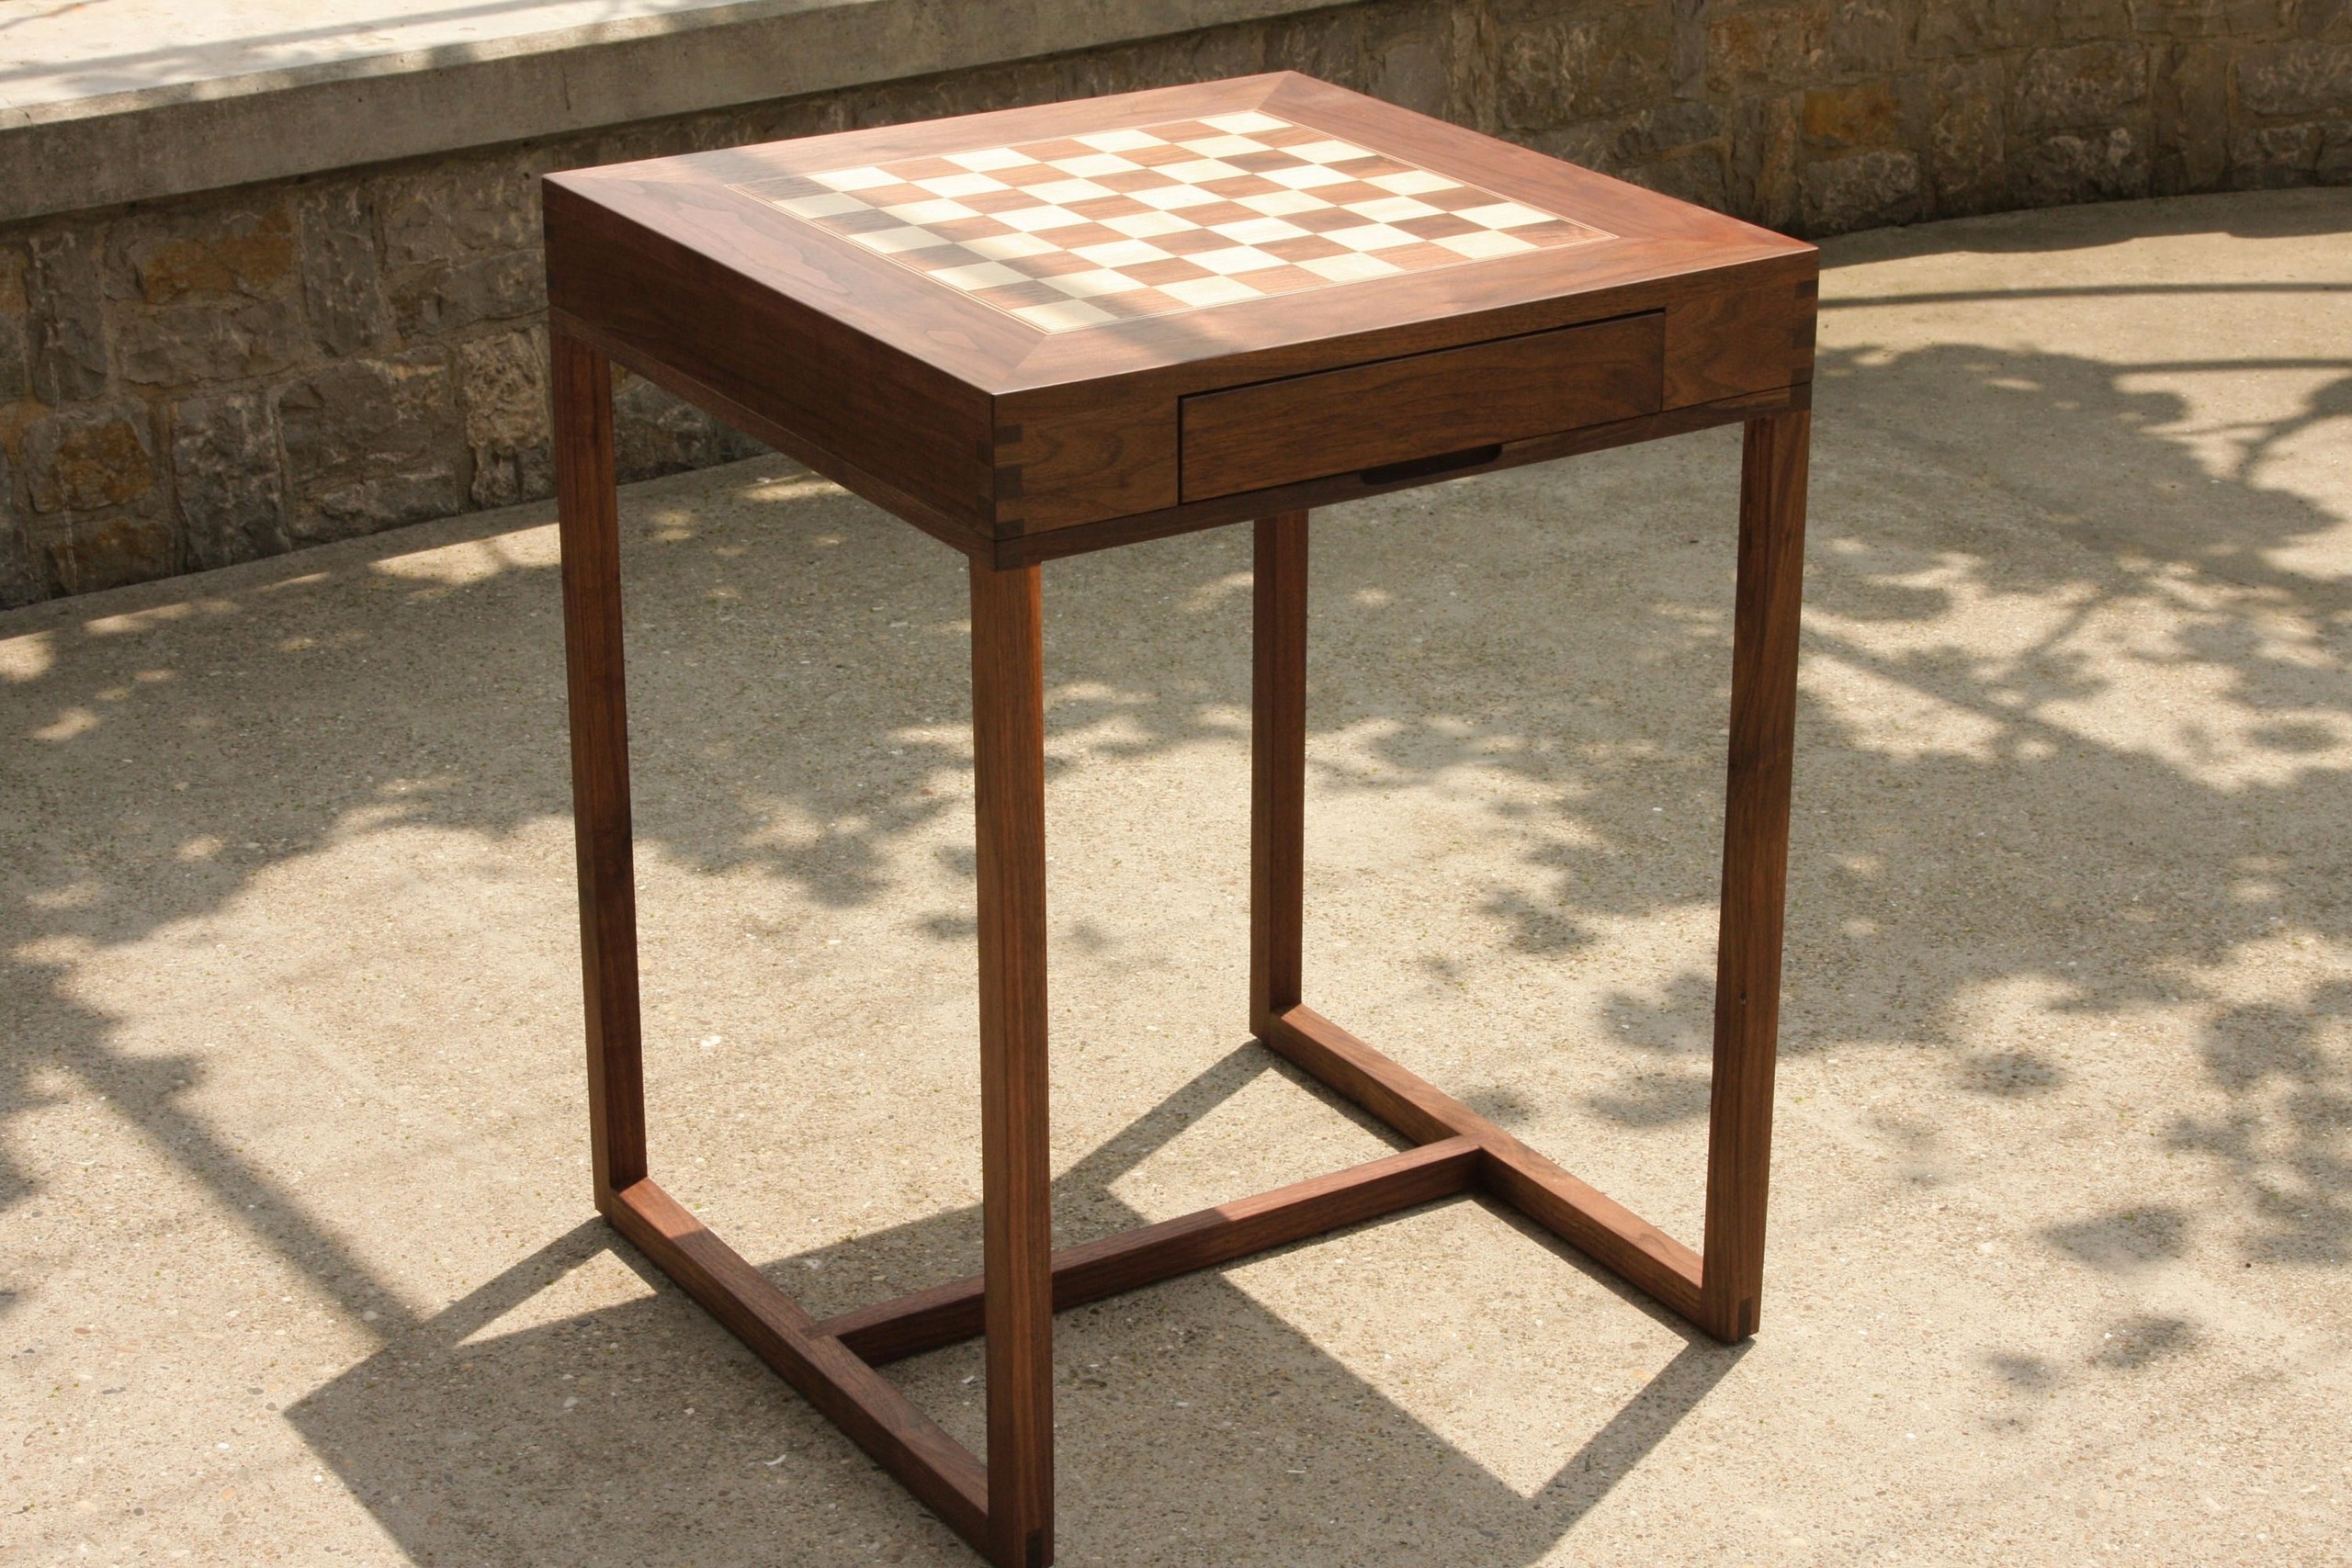 Chess table with drawer 2 etsy in 2020 chess table